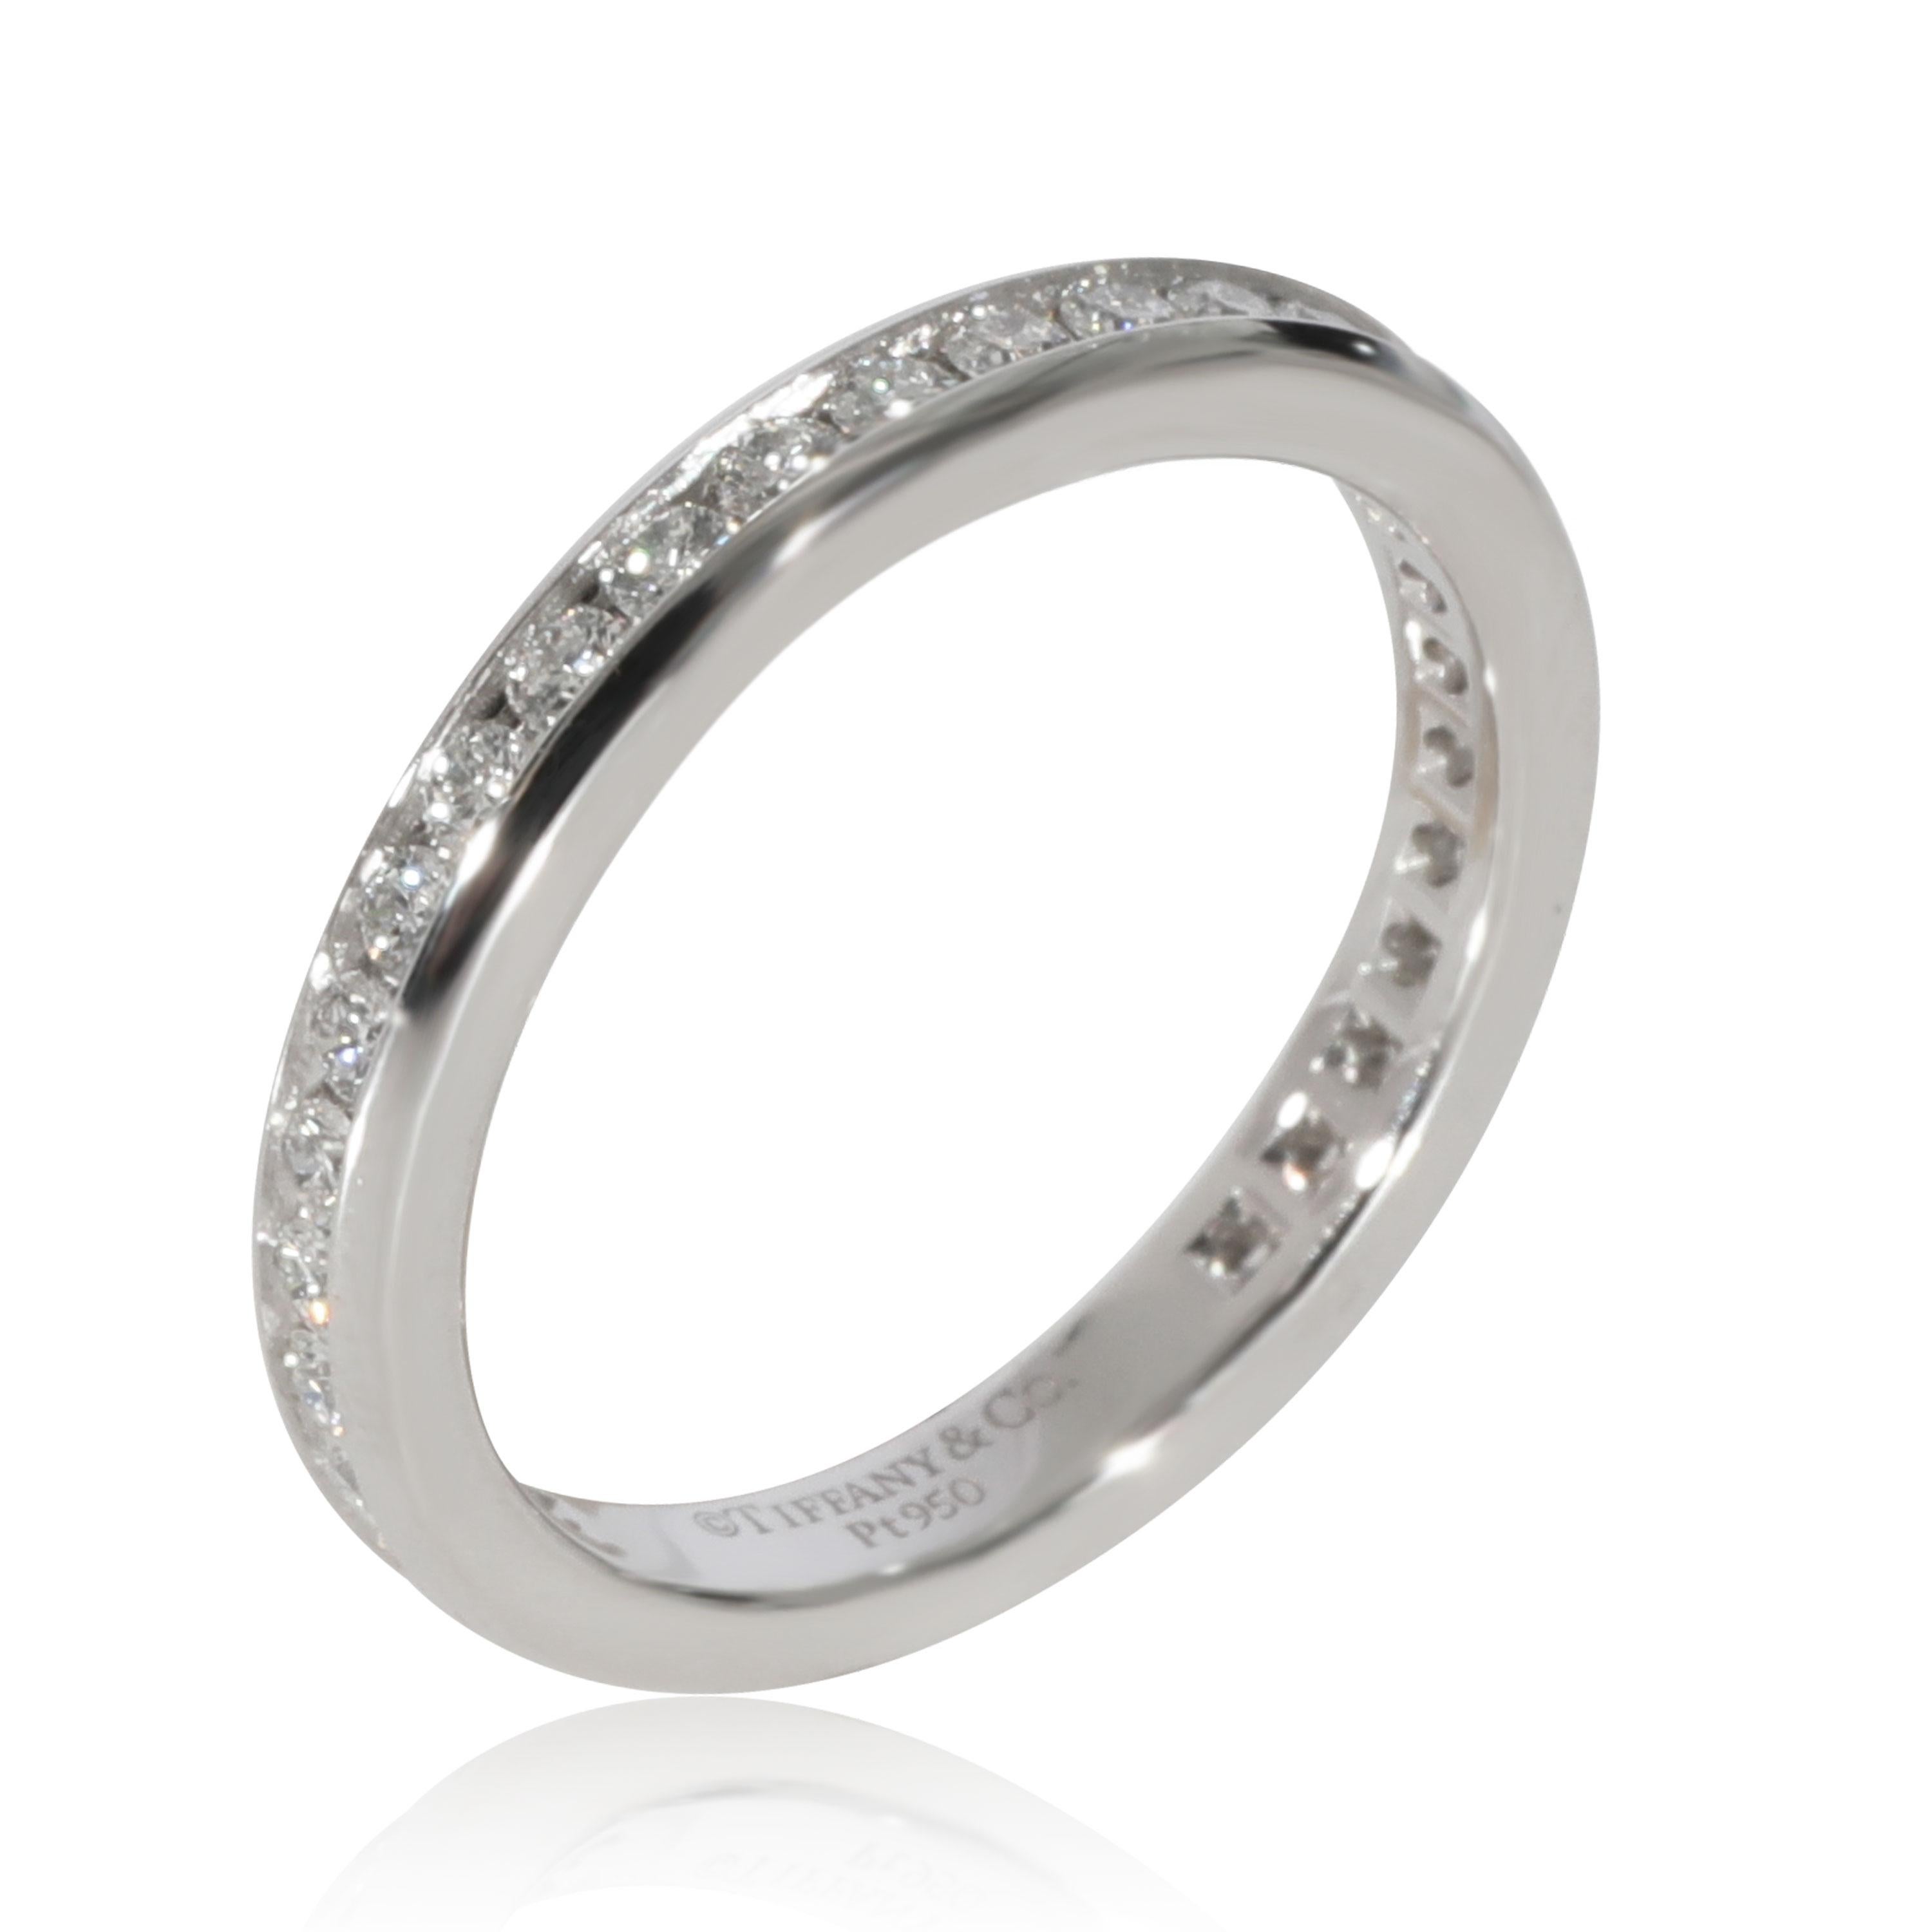 Tiffany & Co. Channel Set Diamond Eternity Band in Platinum 0.56 Ctw In Excellent Condition For Sale In New York, NY